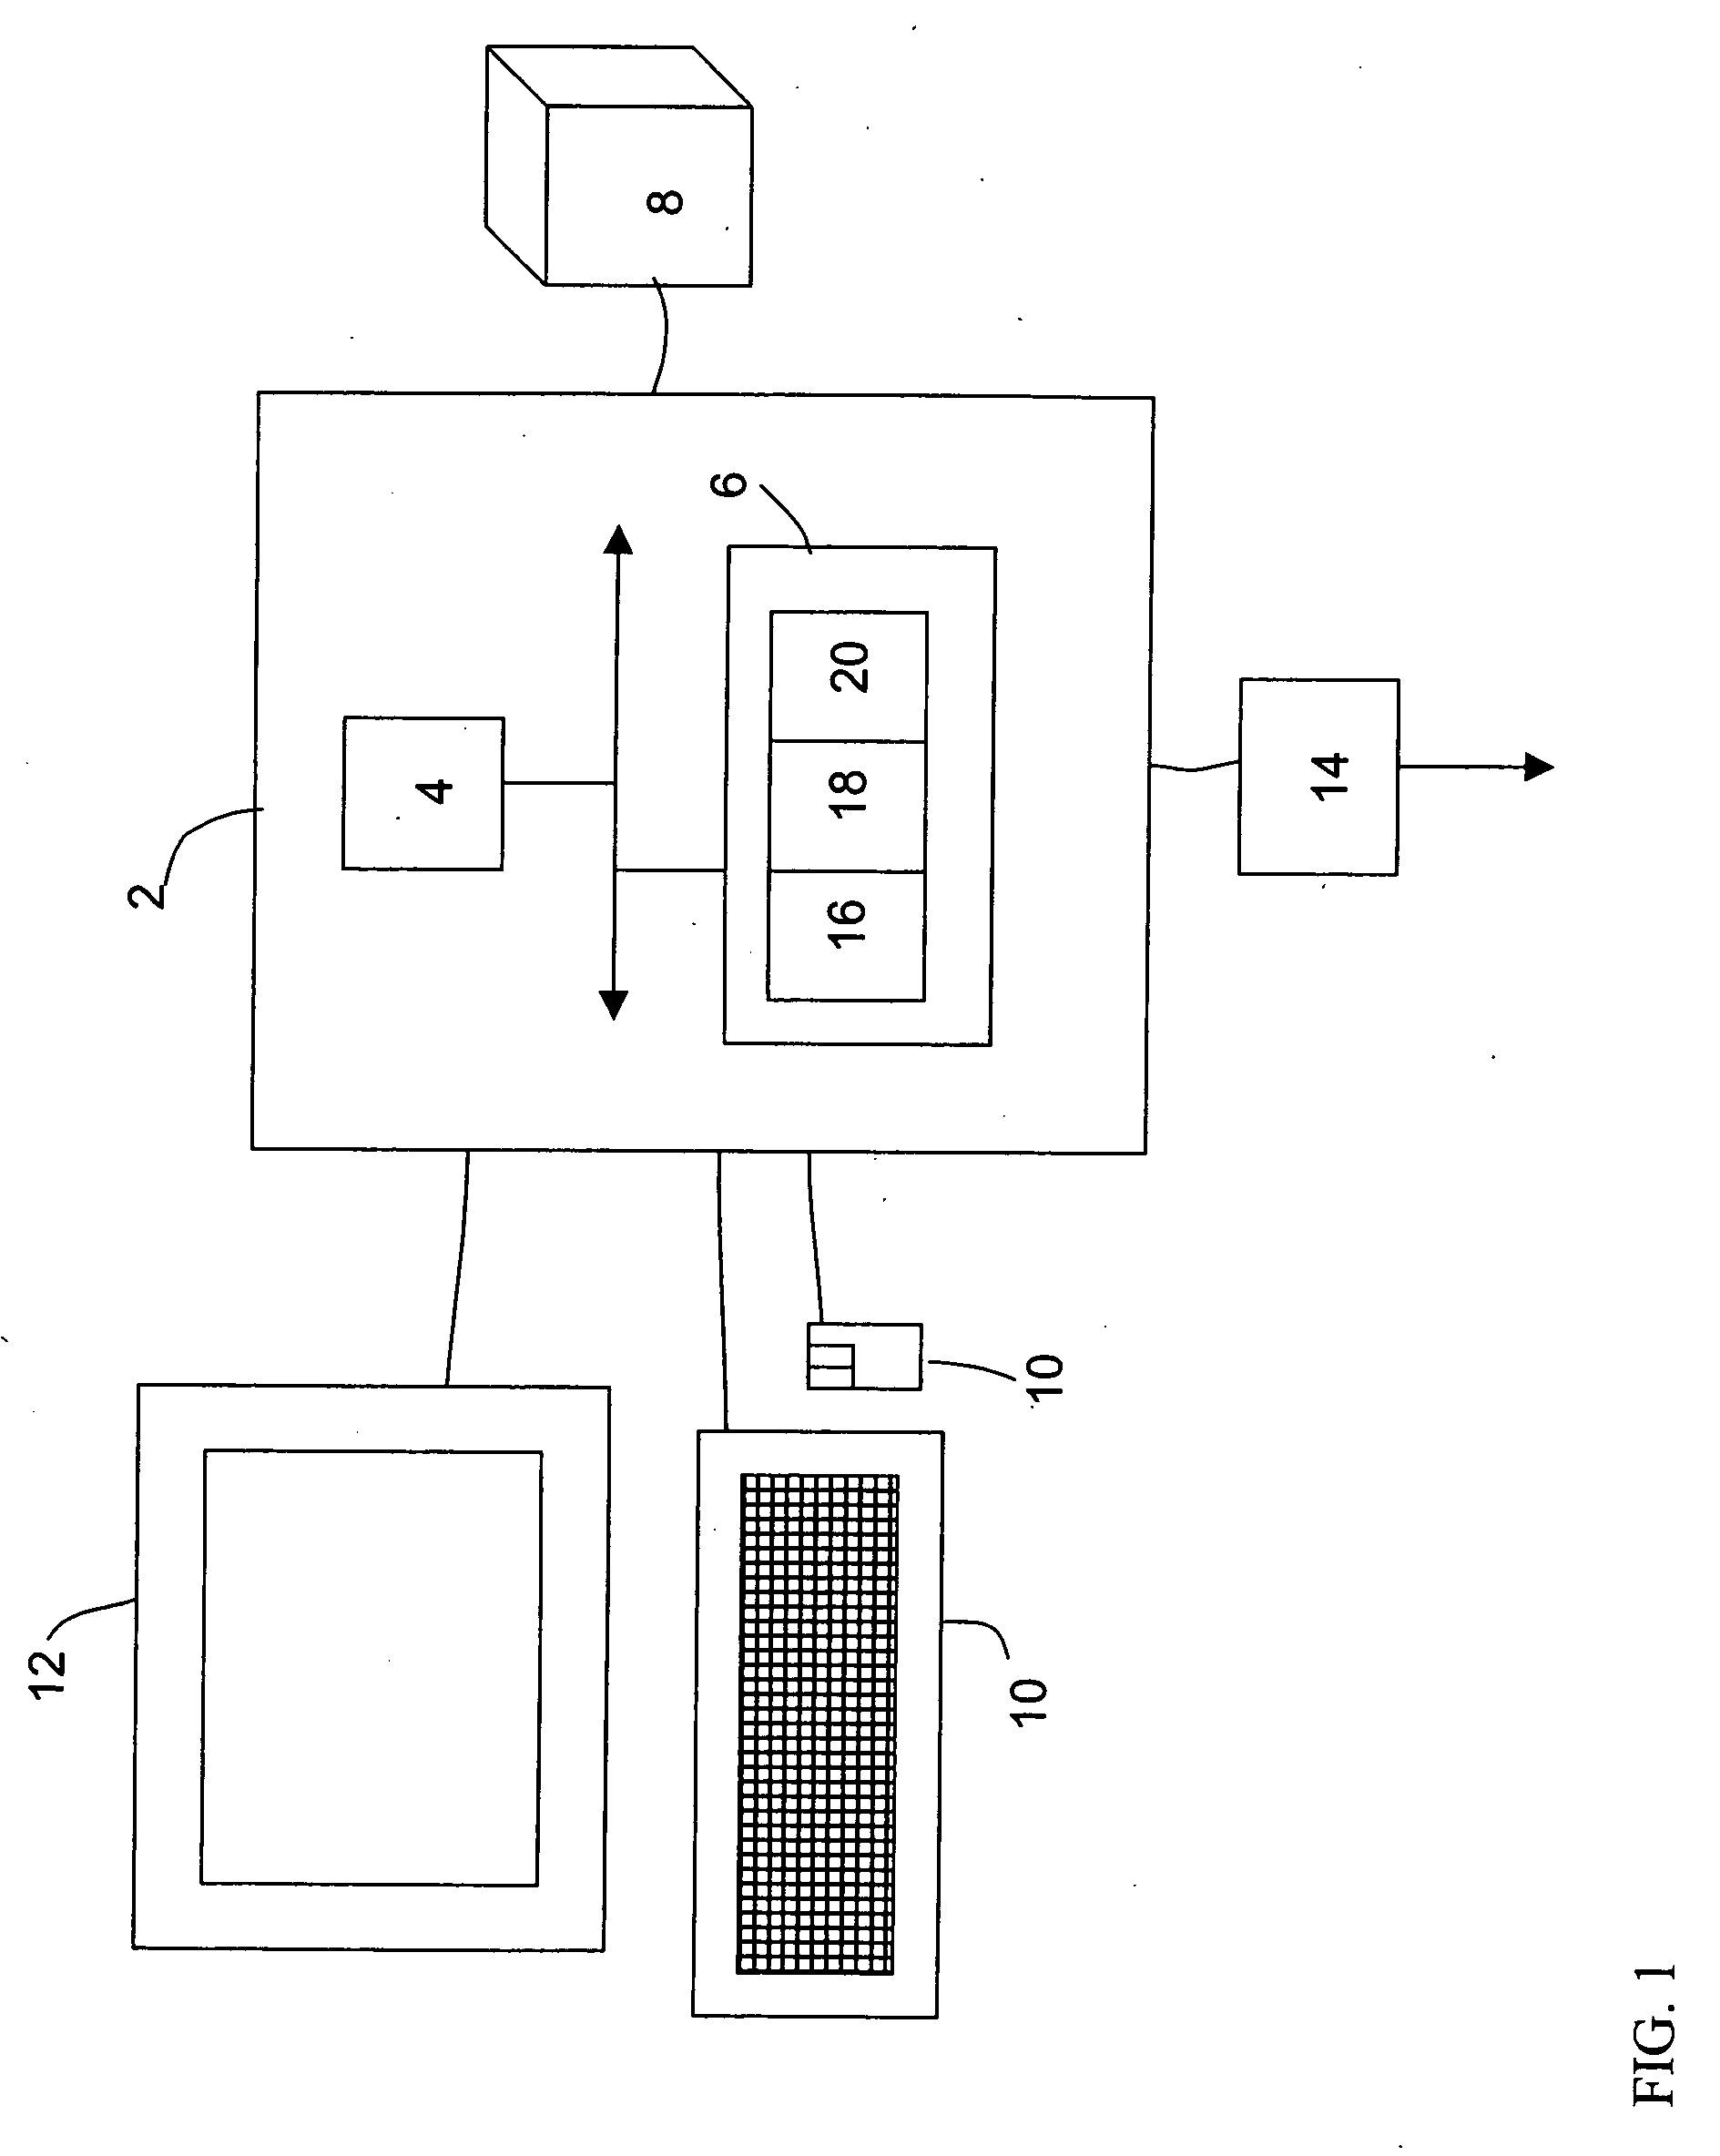 Mass intensity profiling system and uses thereof